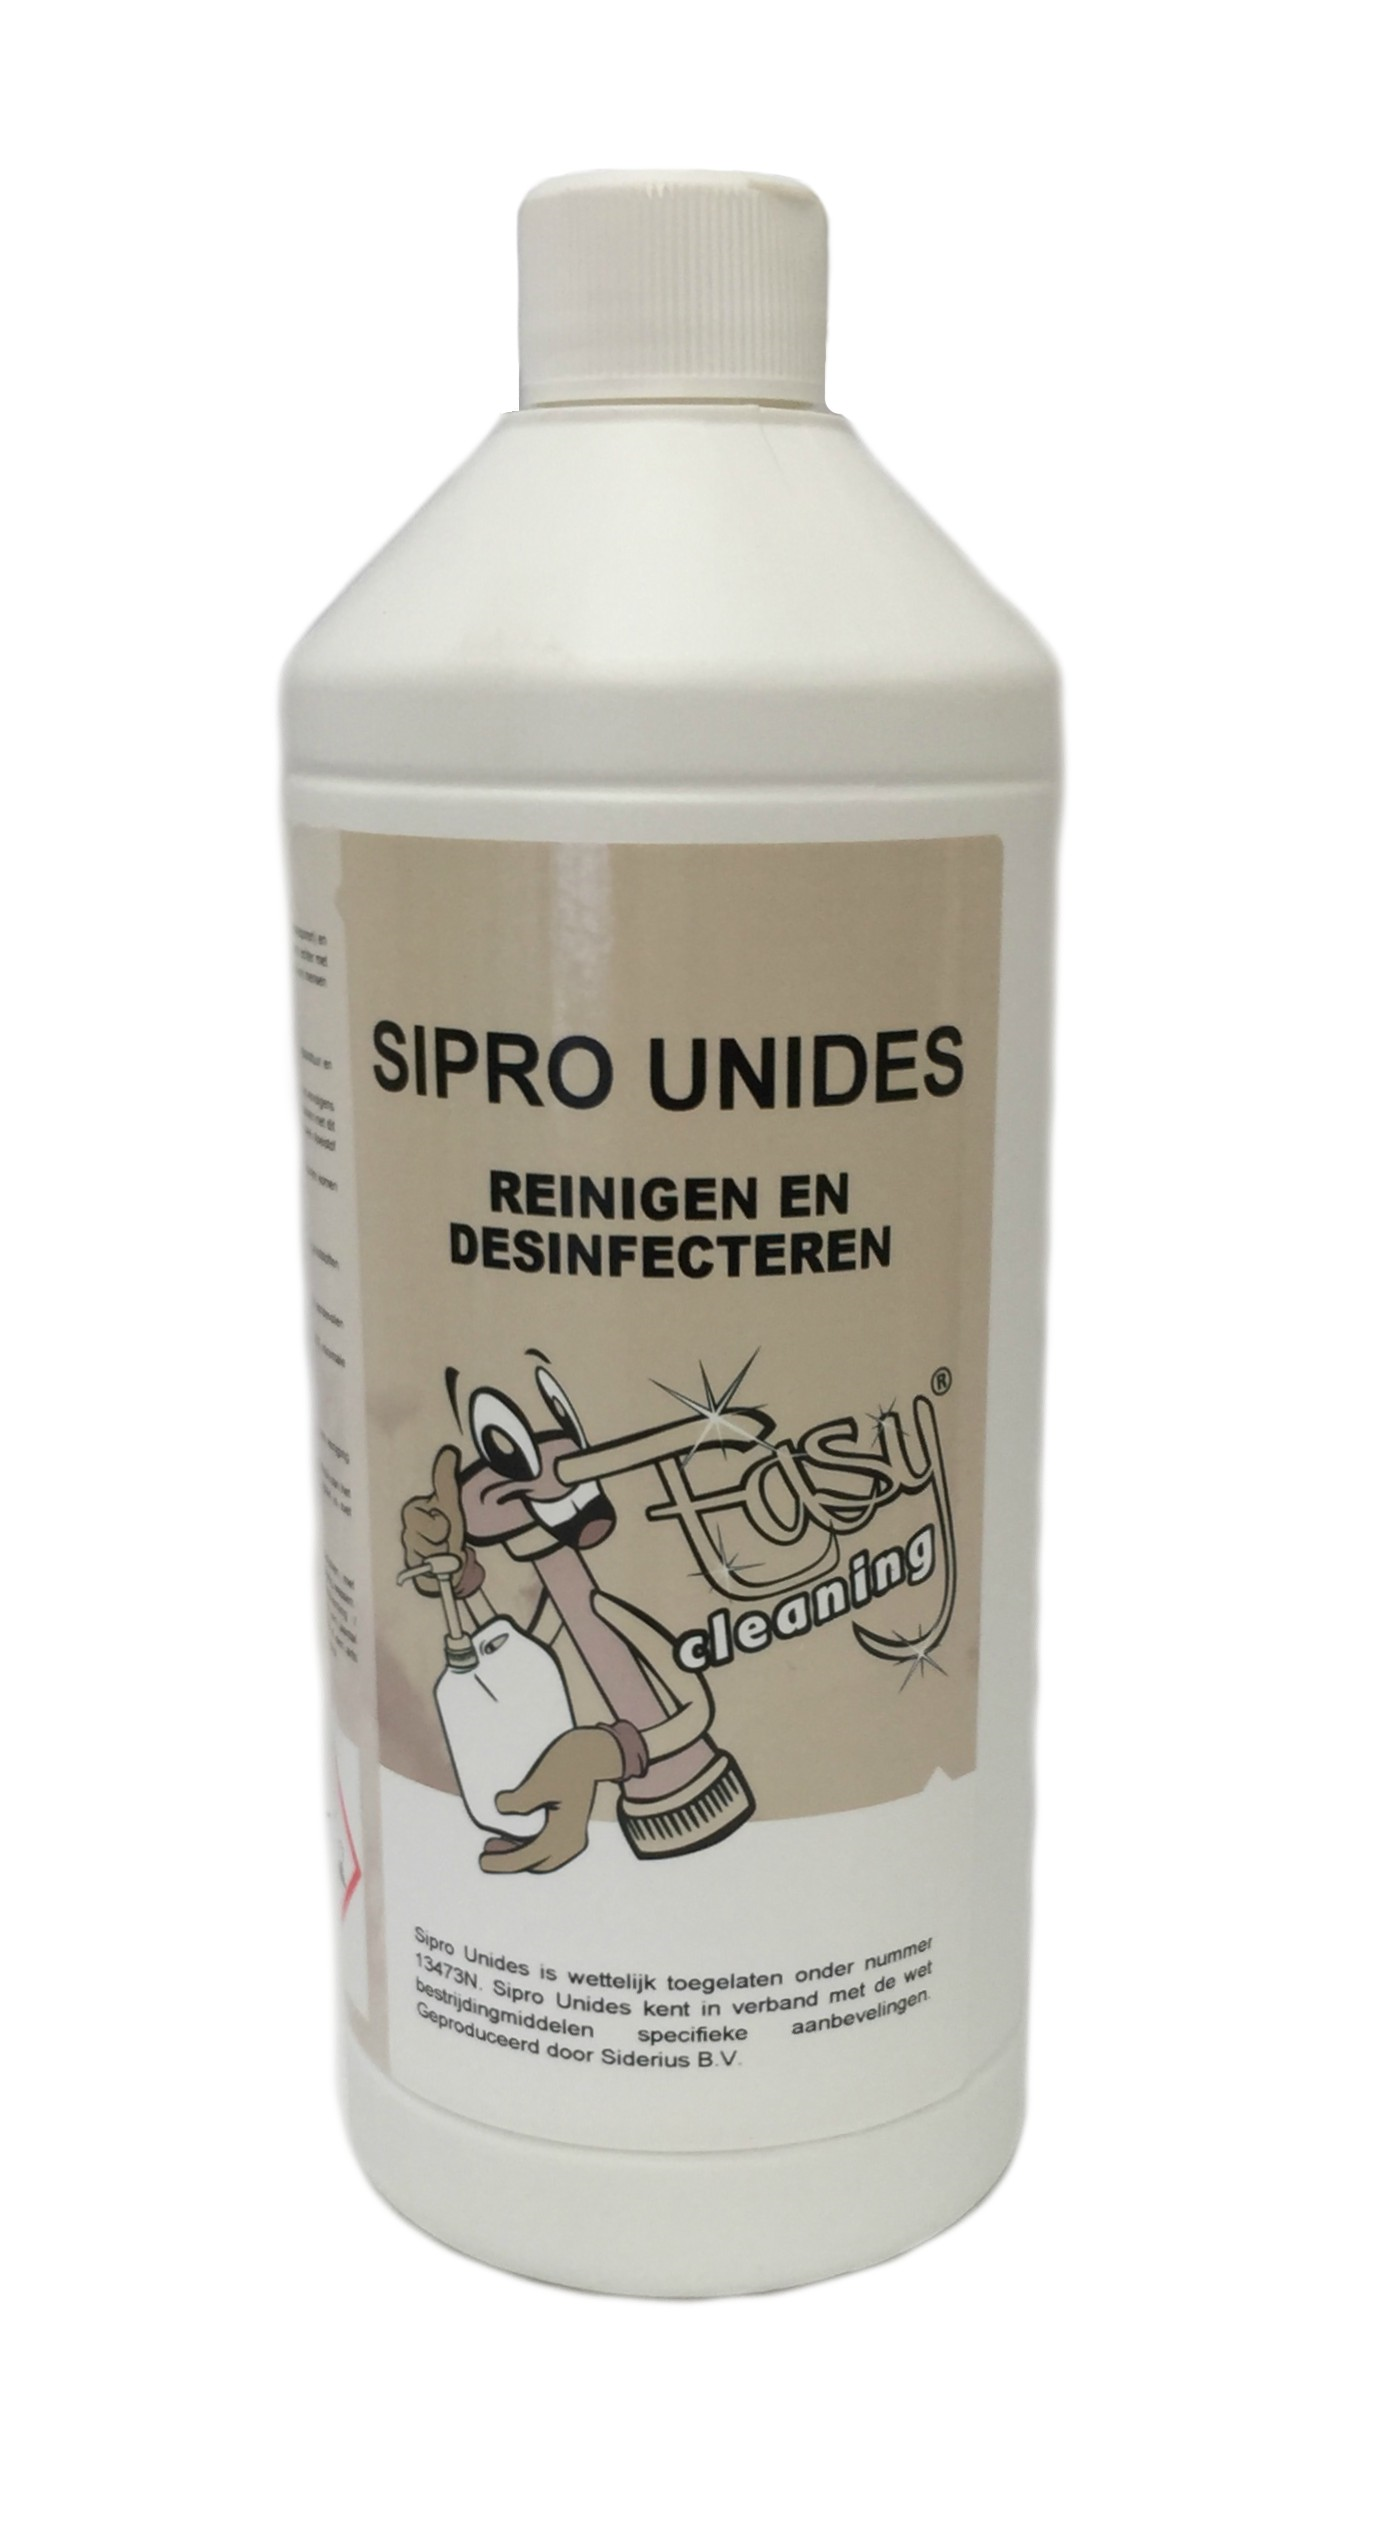 Easy Cleaning nr. 7 Sipro unides 1 liter